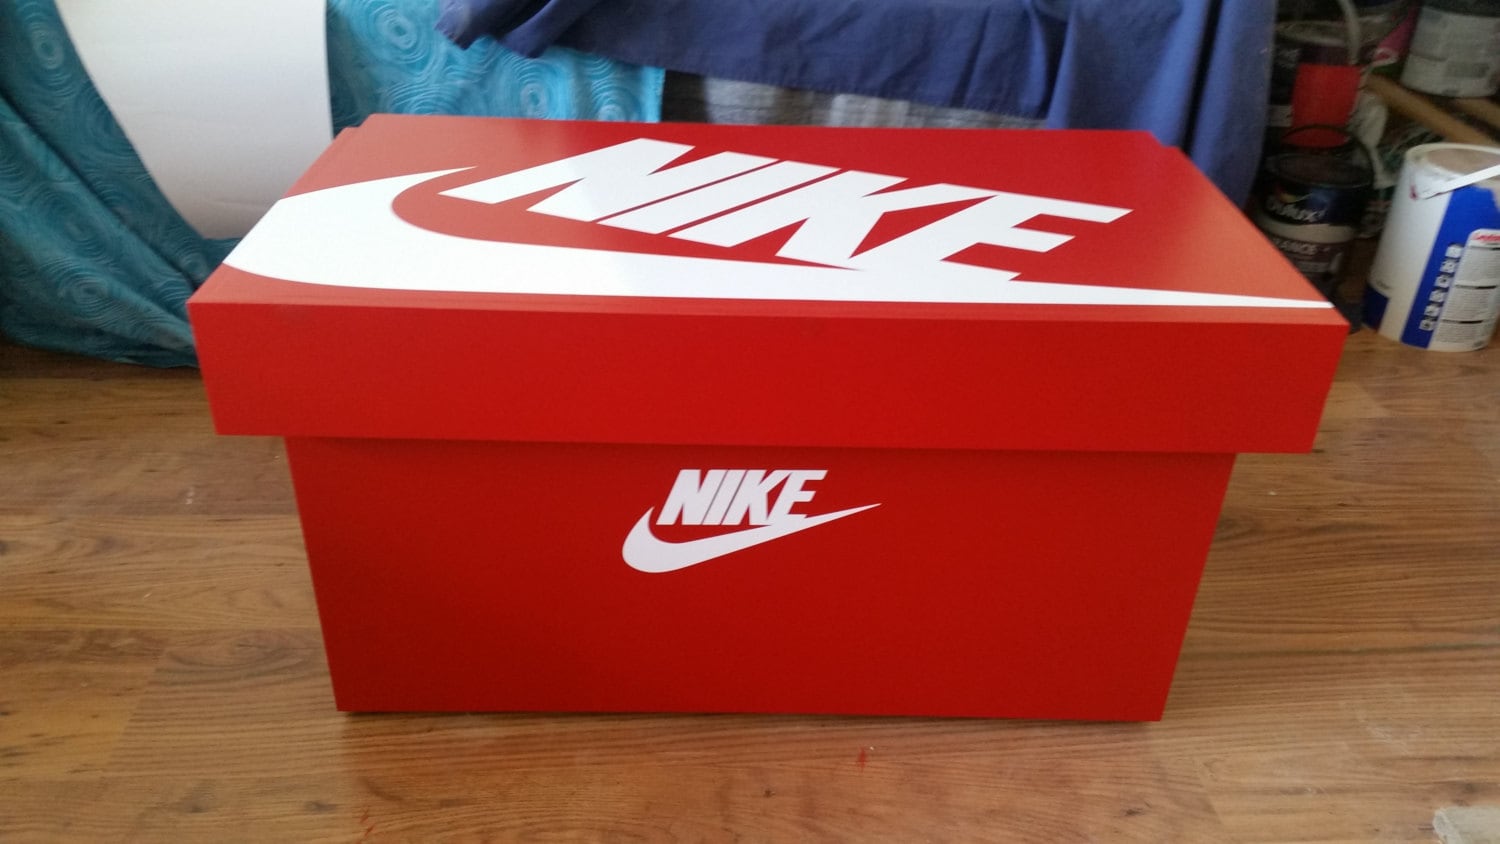 XL Trainer Shoestorage Box, Giant Sneaker Box fits 6-8no Pairs of Trainers,  Gift for Him, Birthday Present, Gift, Present, Storage - Etsy